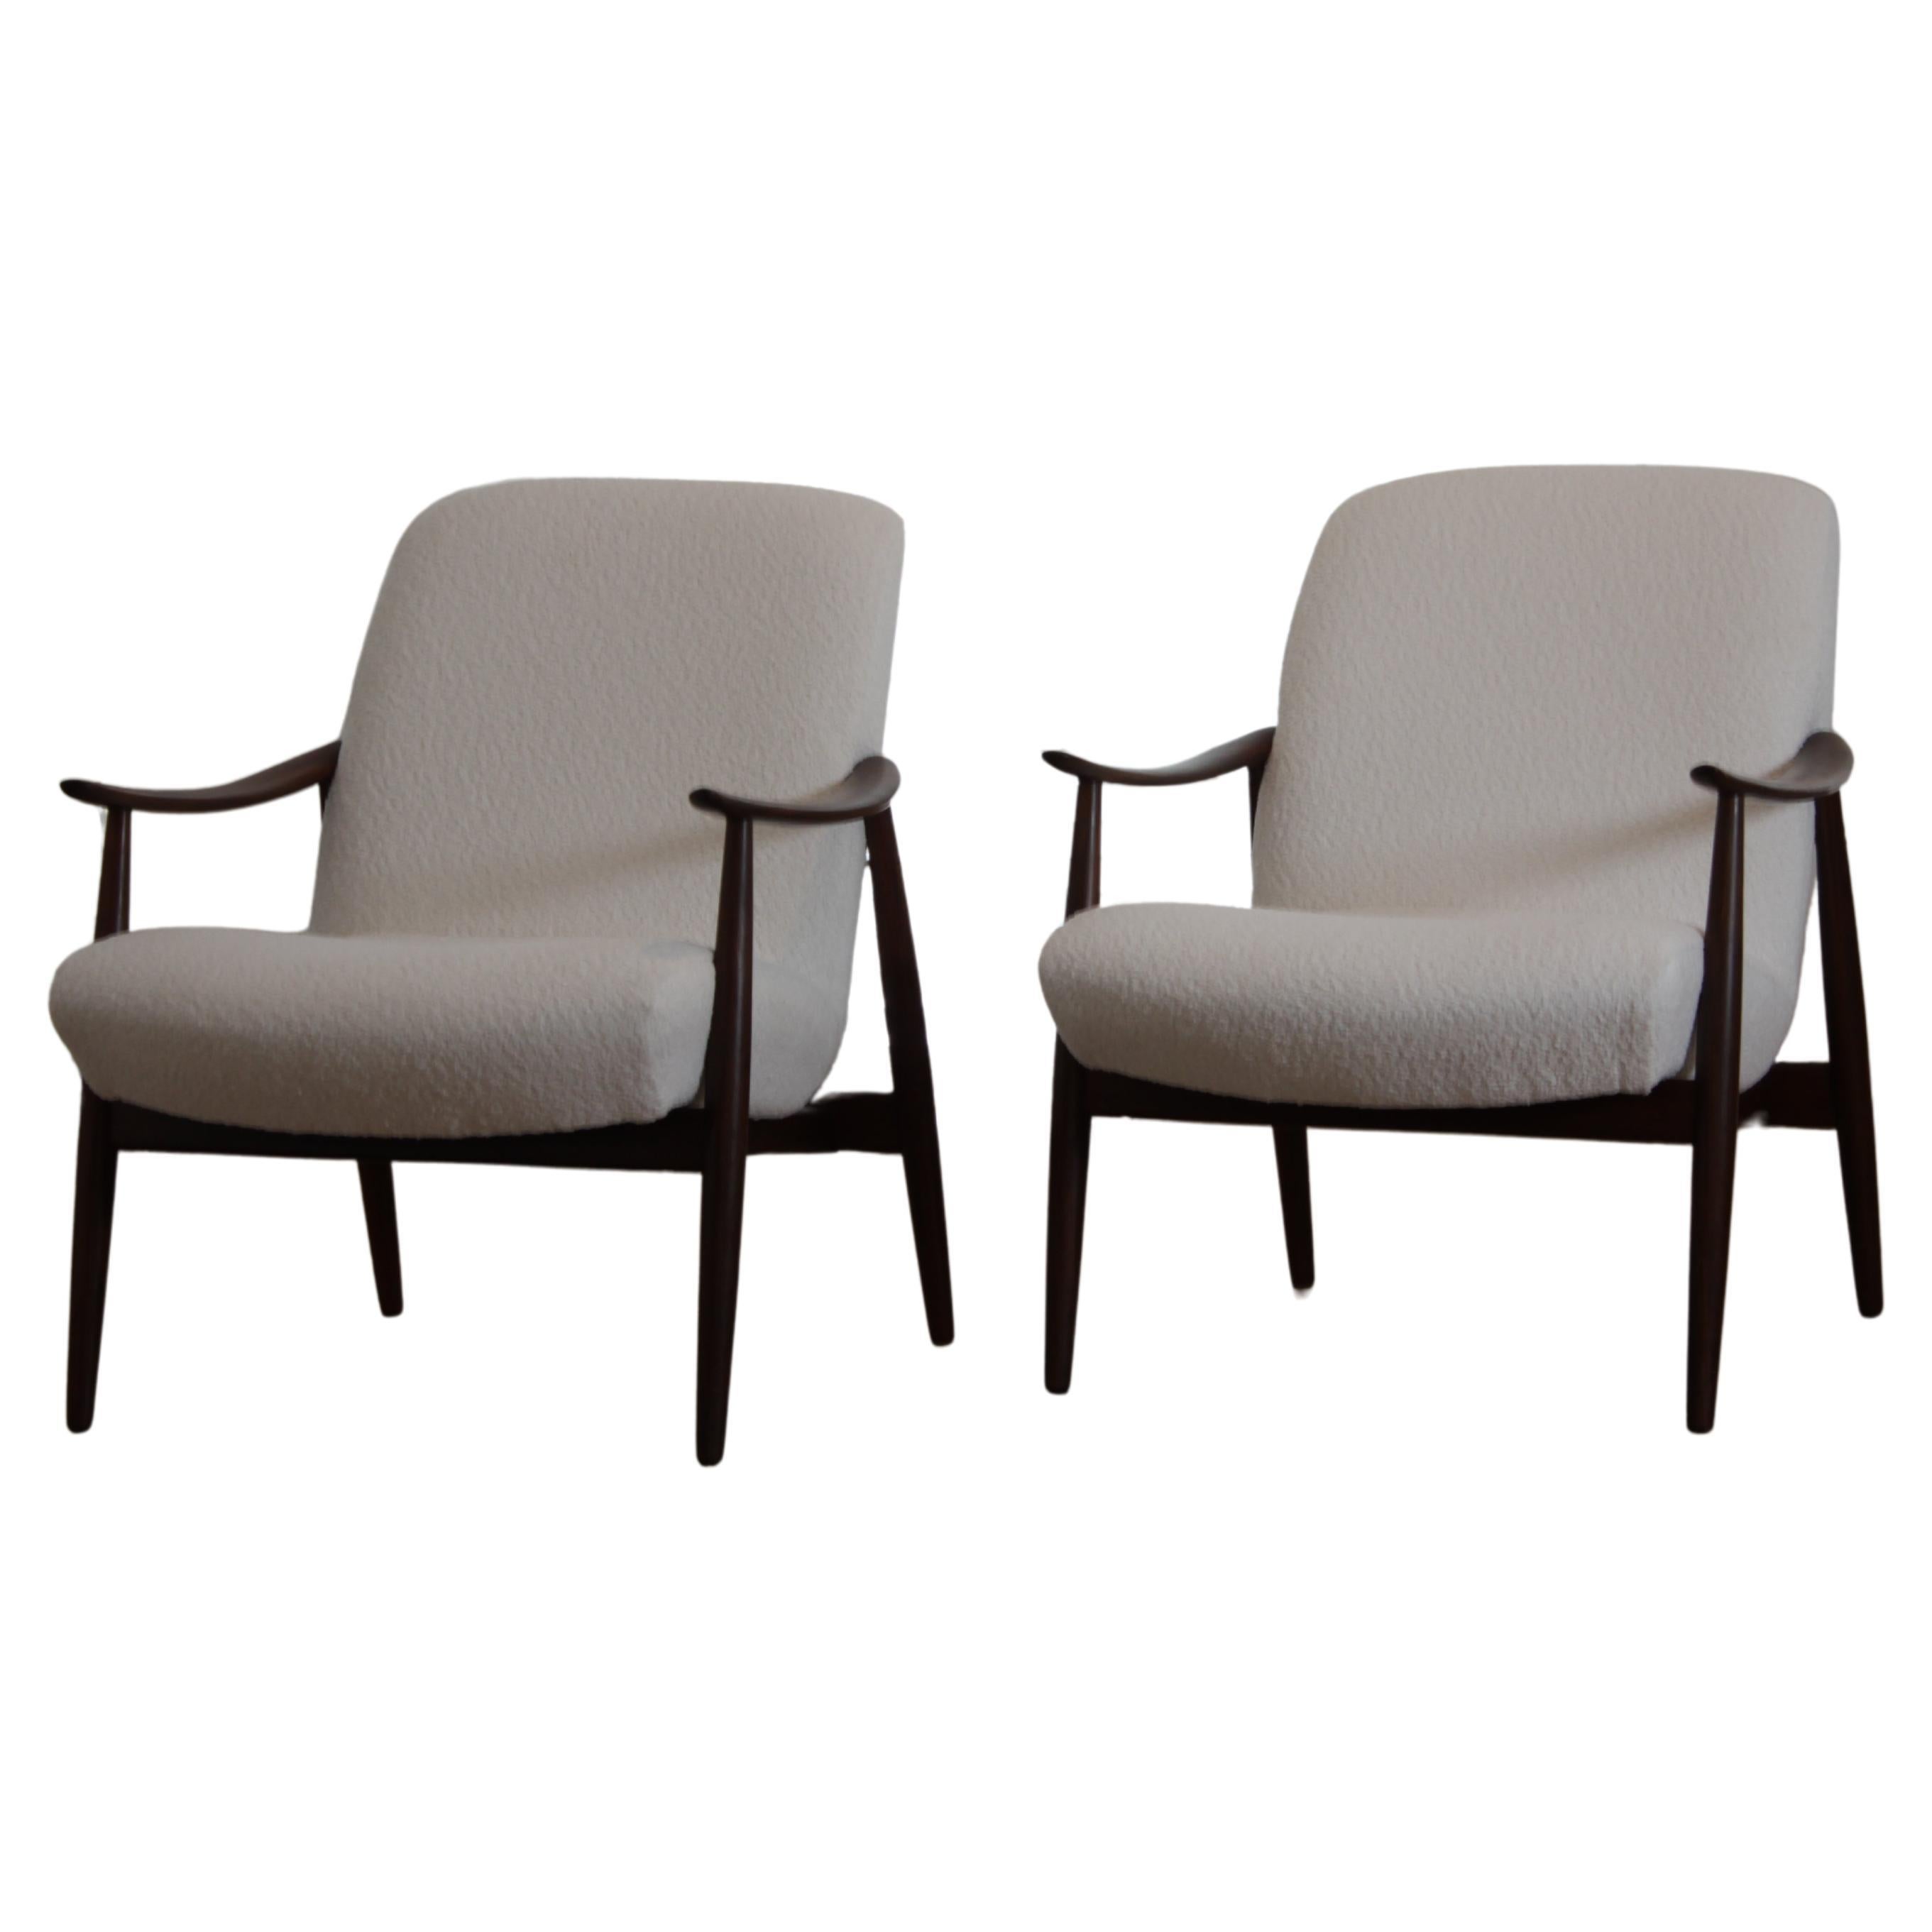 Mid 20th Century Modern Pair of Armchairs by Ingmar Relling for Westnofa, 1960s For Sale